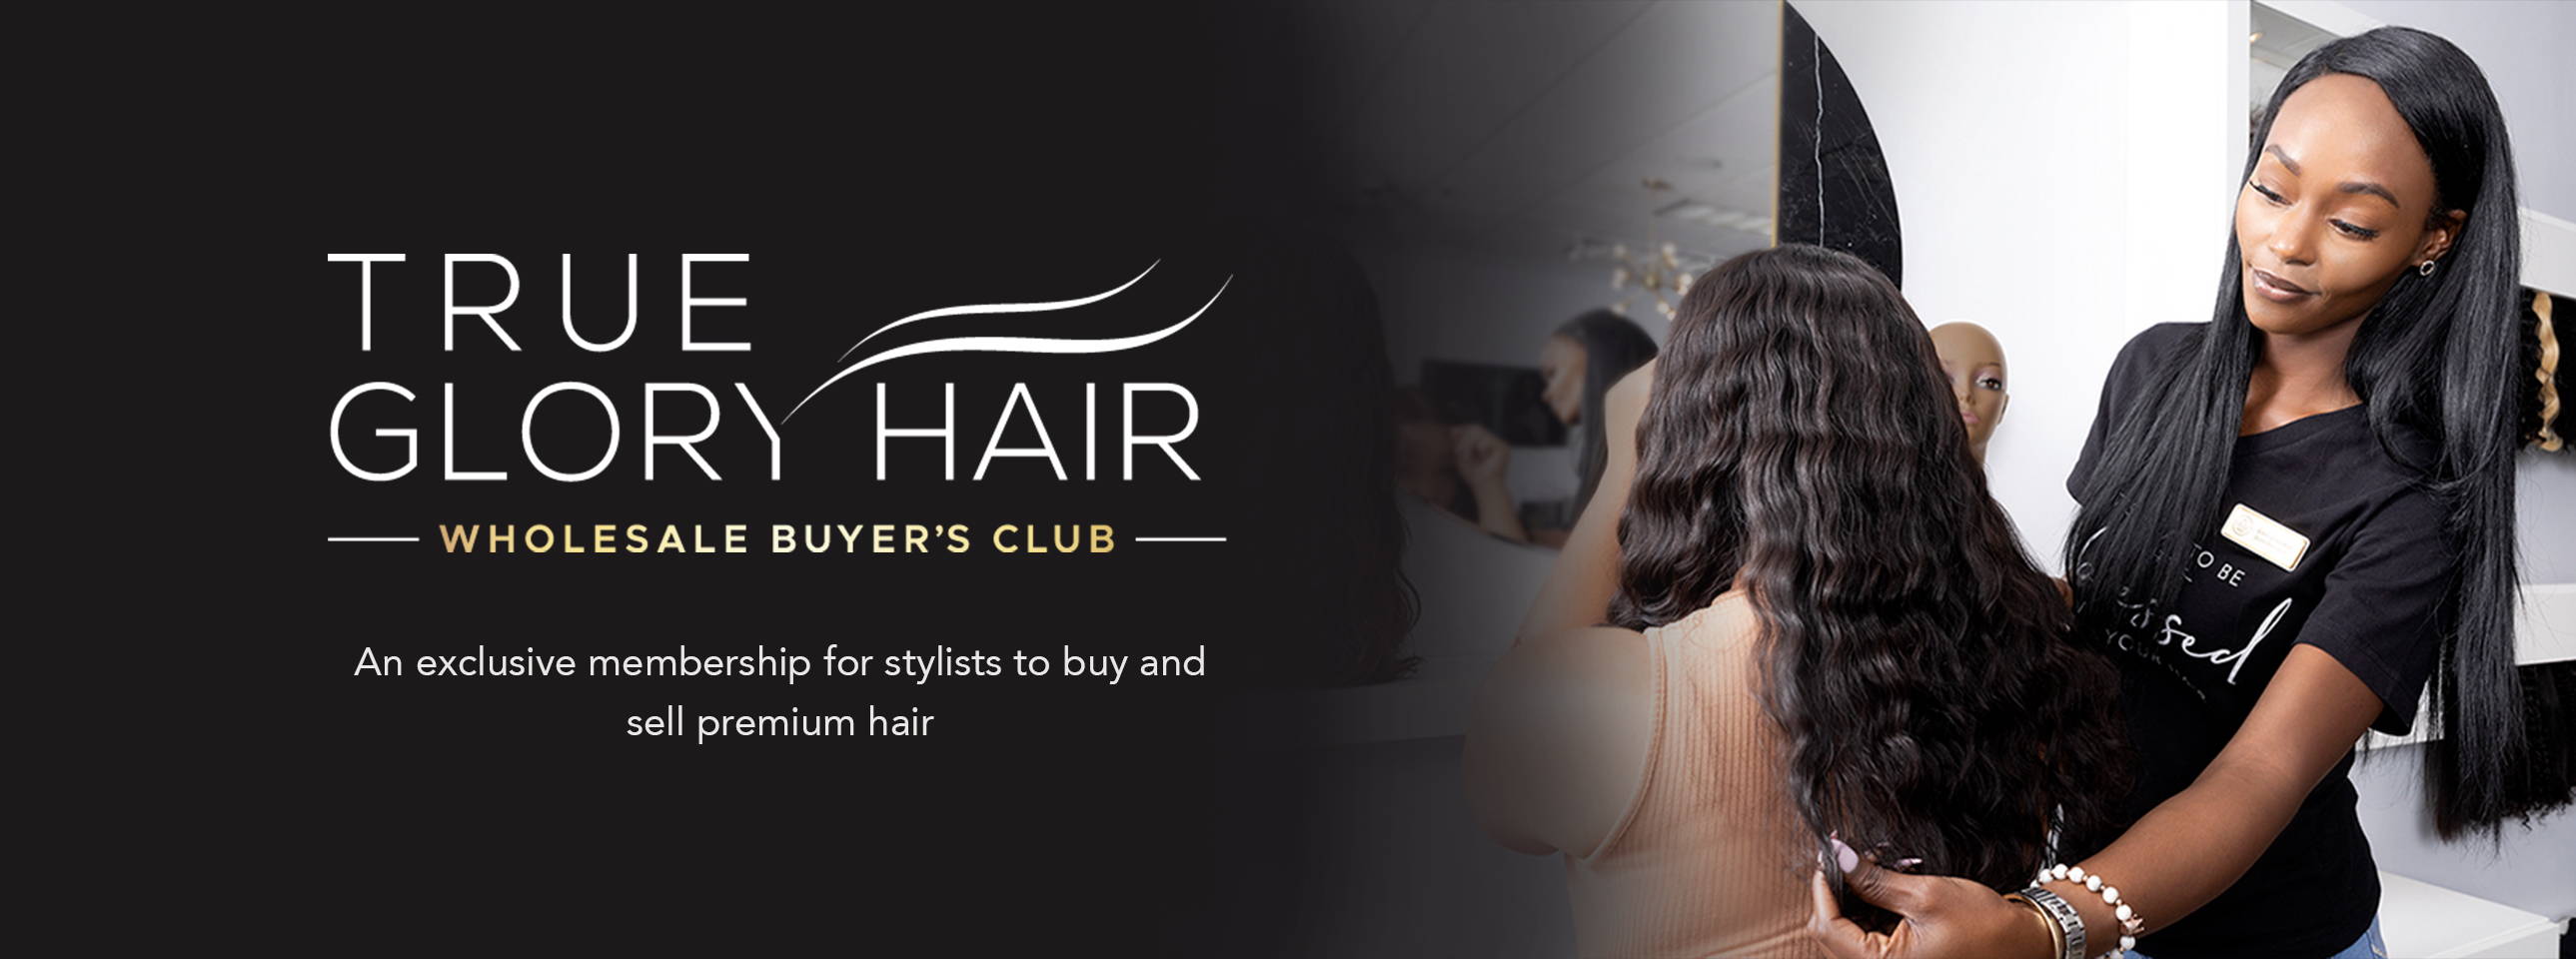 Become A Part Of The Wholesale Buyer's Club | True Glory Hair